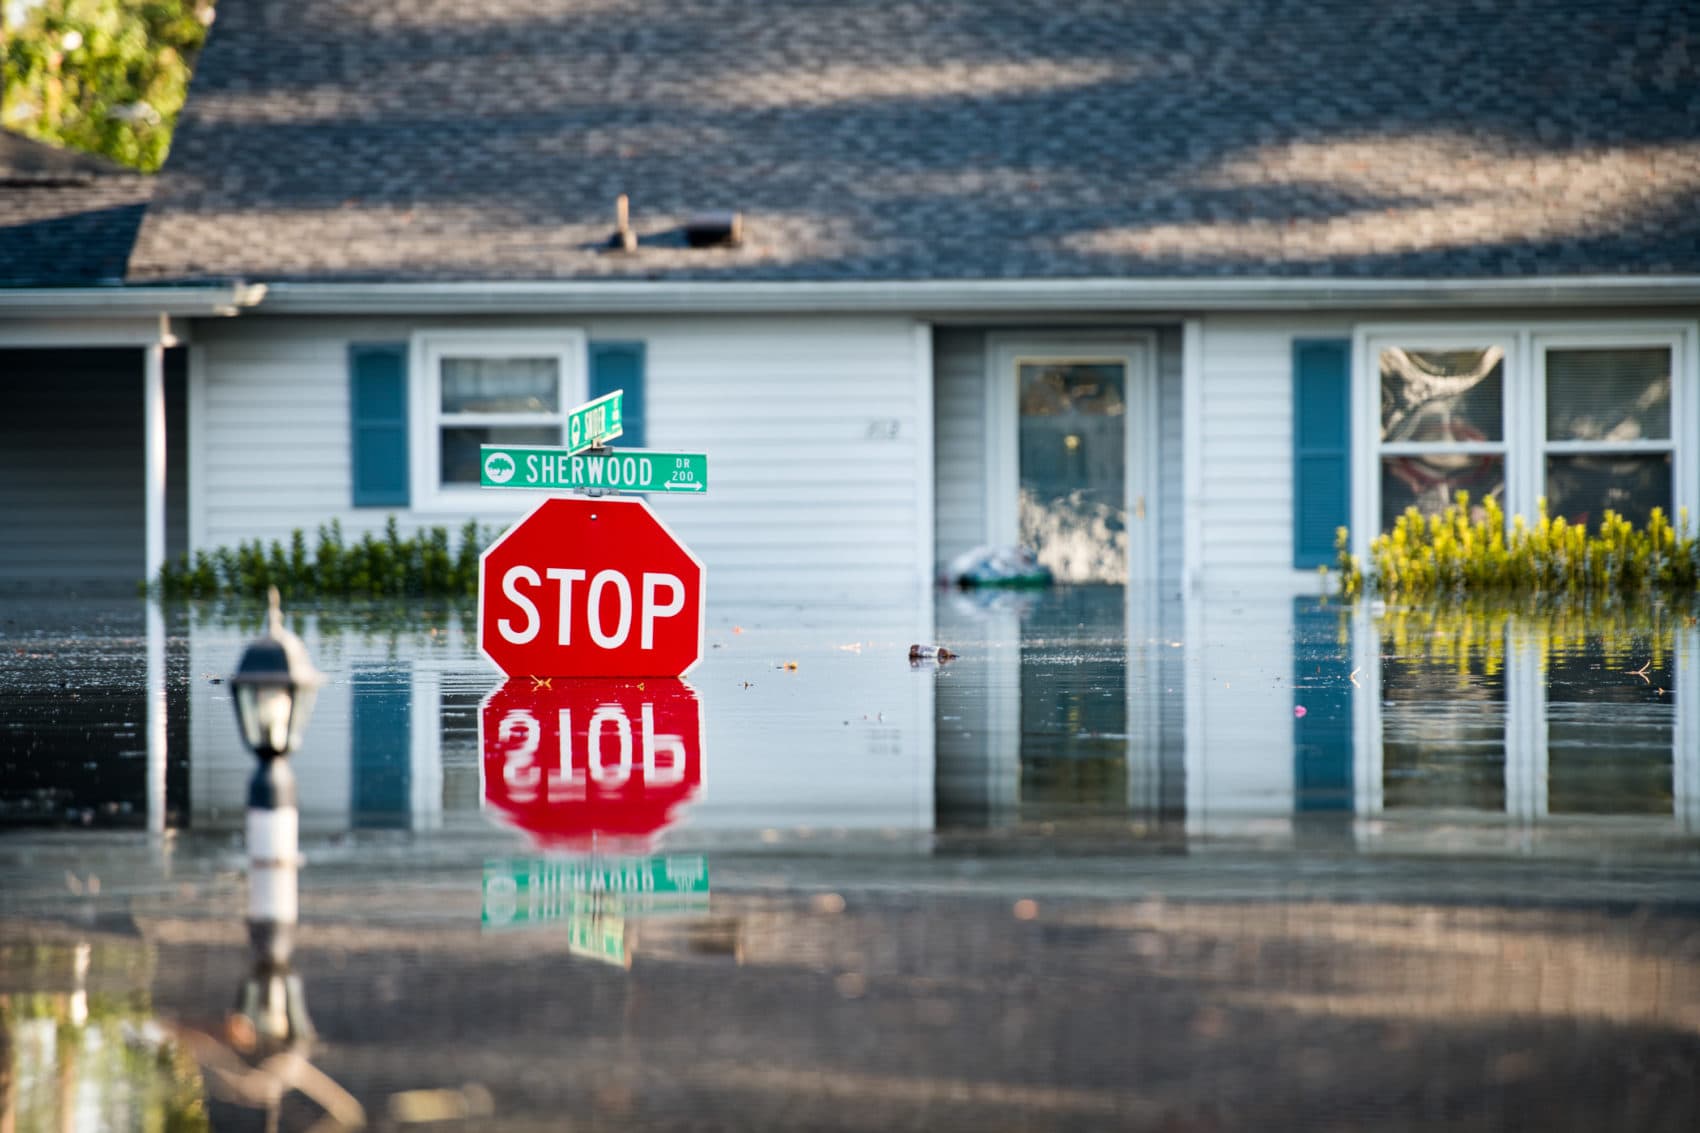 A home is inundated by floodwaters caused by Hurricane Florence near the Crabtree Swamp on Sept. 26, 2018 in Conway, S.C. (Sean Rayford/Getty Images)